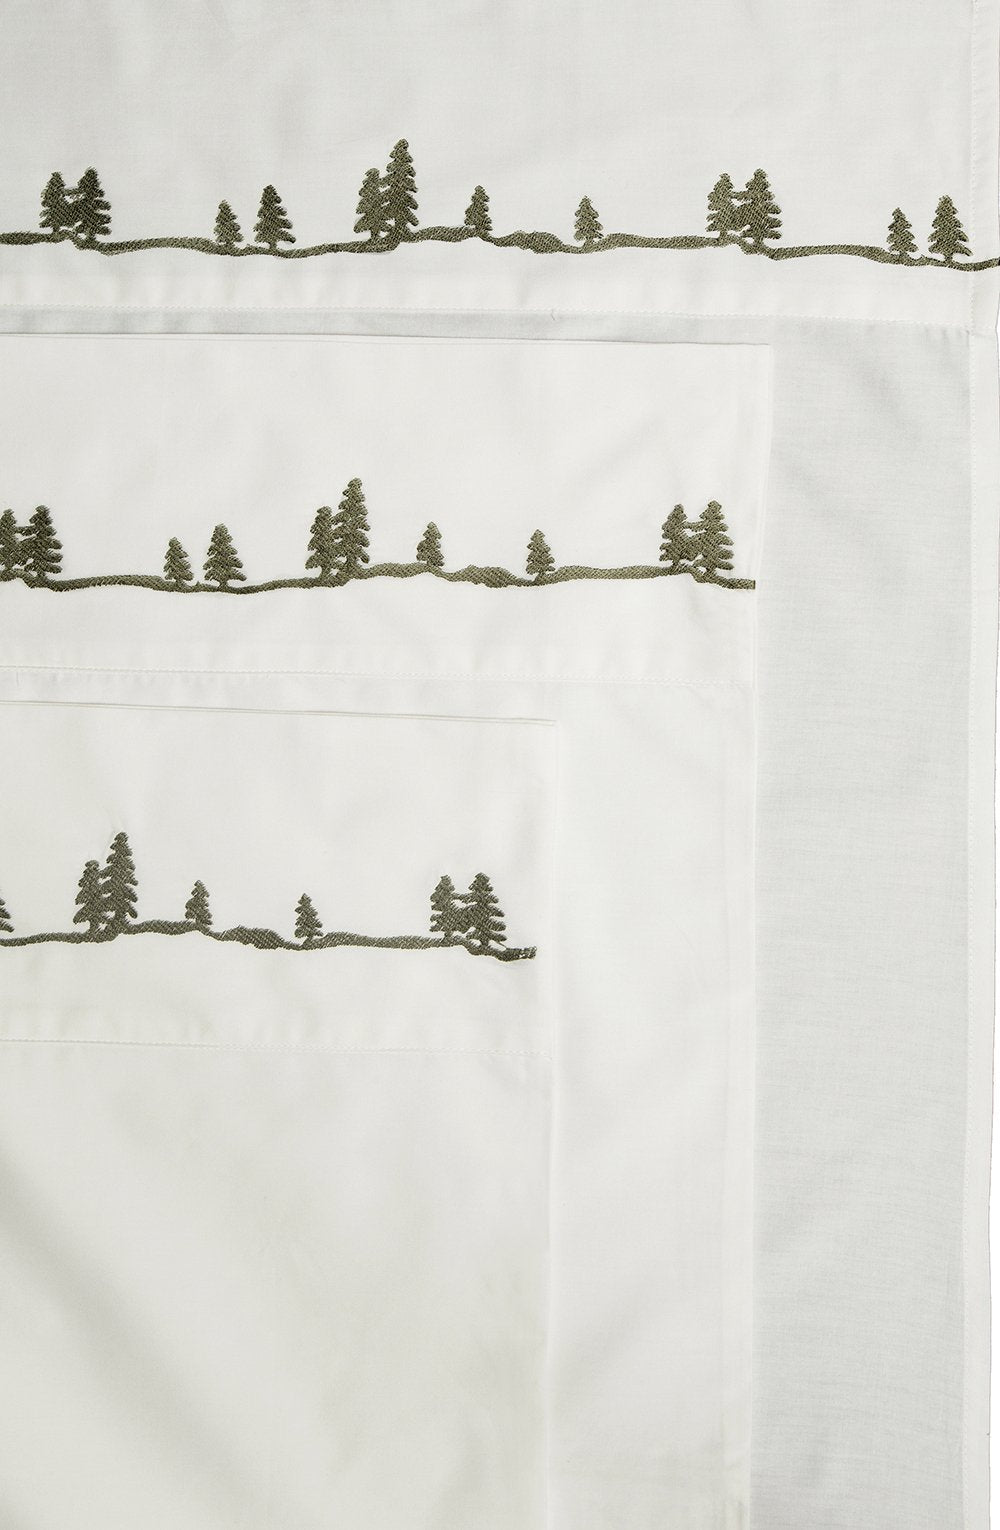 Embroidered Pines Sheet Sets - 100% Cotton